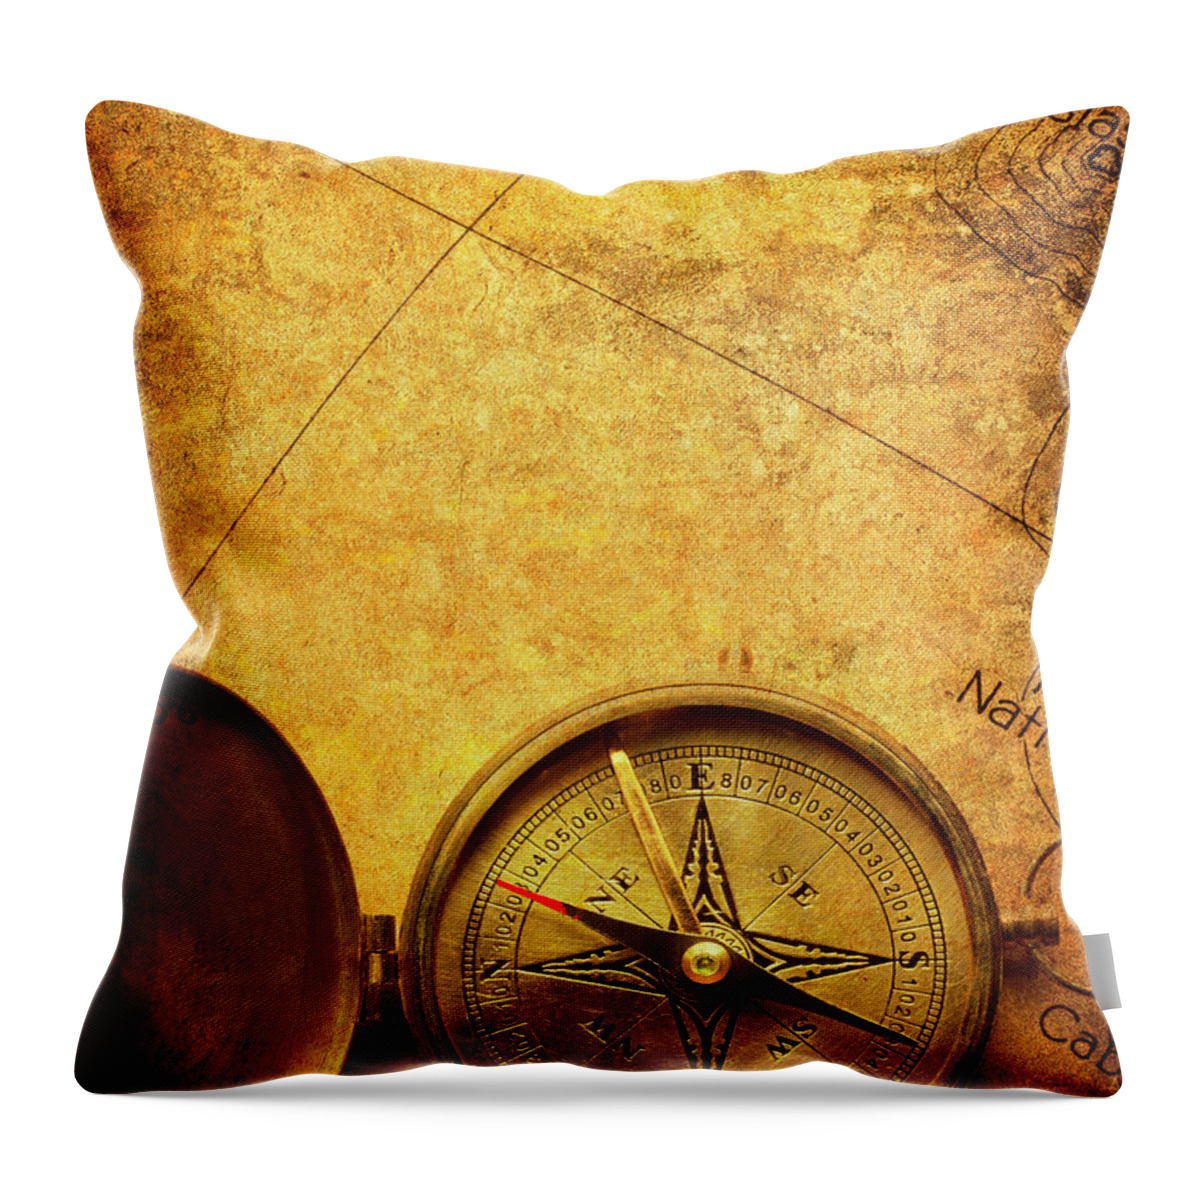 East Throw Pillow featuring the photograph Compass by Dny59